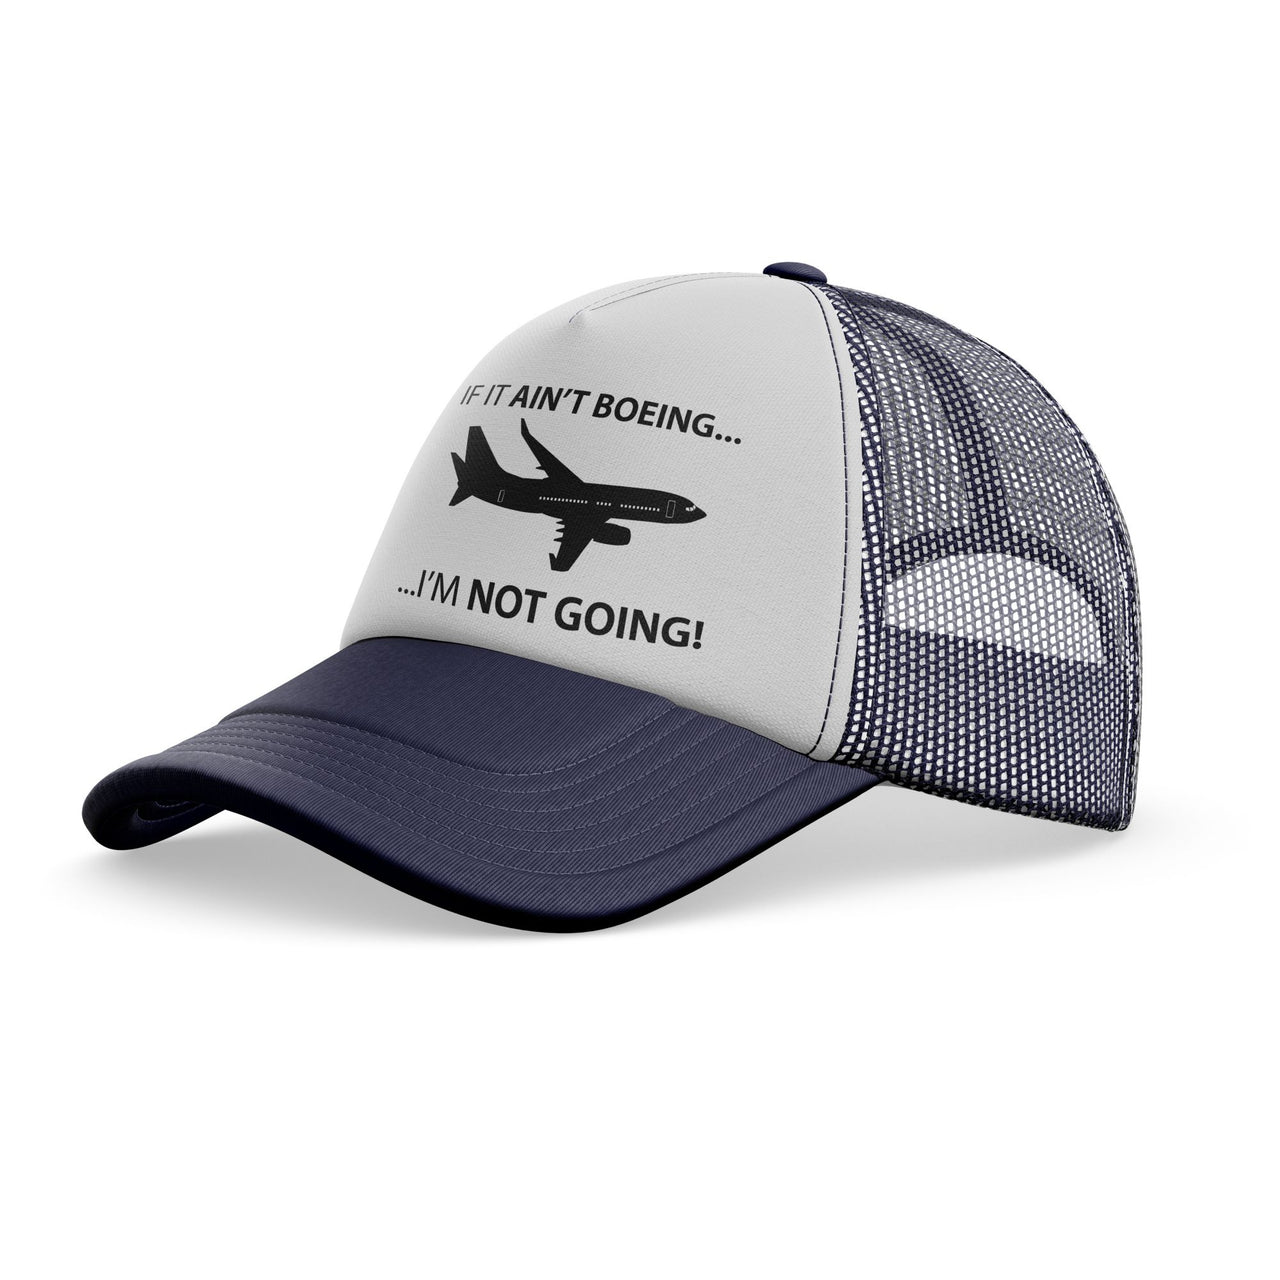 If It Ain't Boeing I'm Not Going! Designed Trucker Caps & Hats